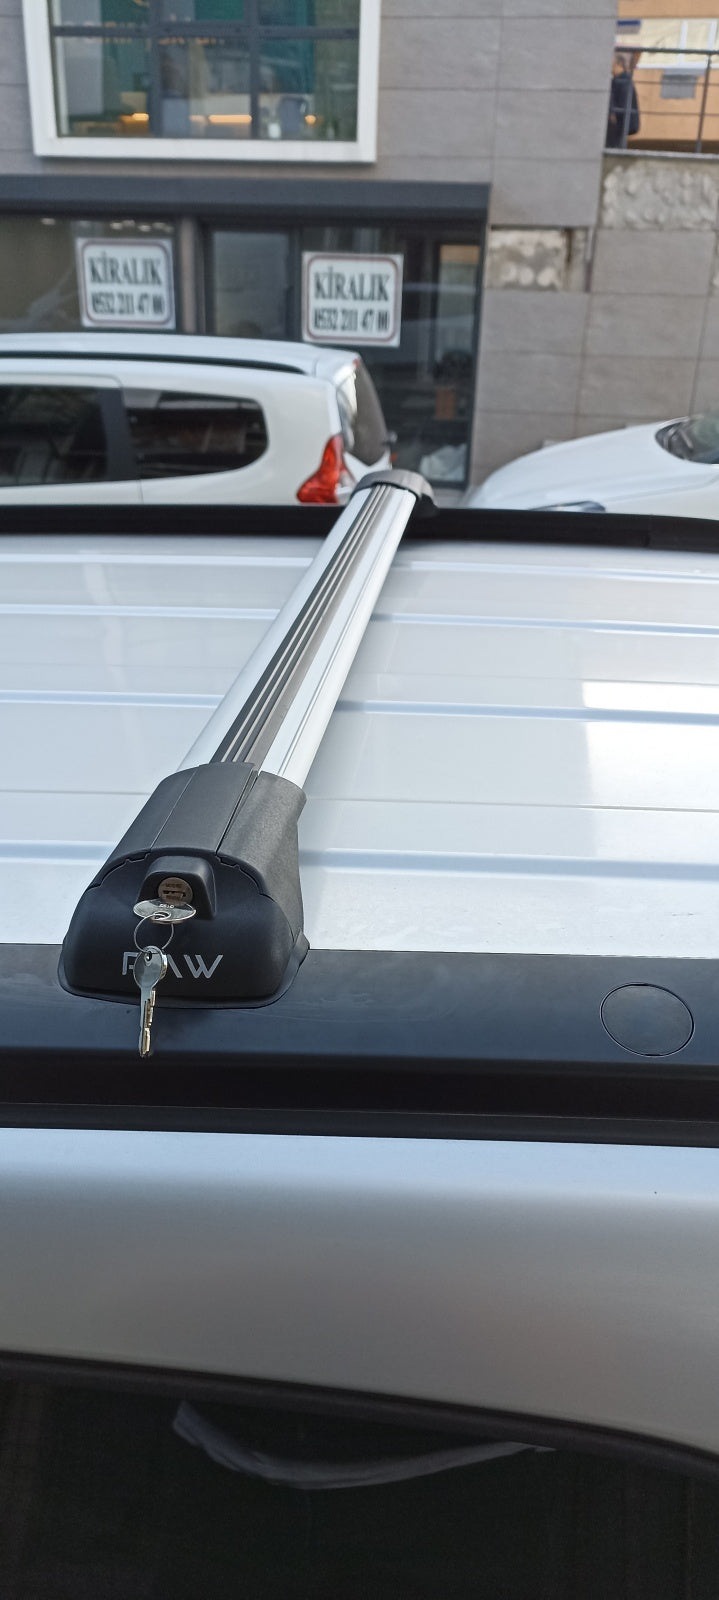 For Suzuki Wagon R 2008-Up Roof Rack System Carrier Cross Bars Aluminum Lockable High Quality of Metal Bracket Silver-6